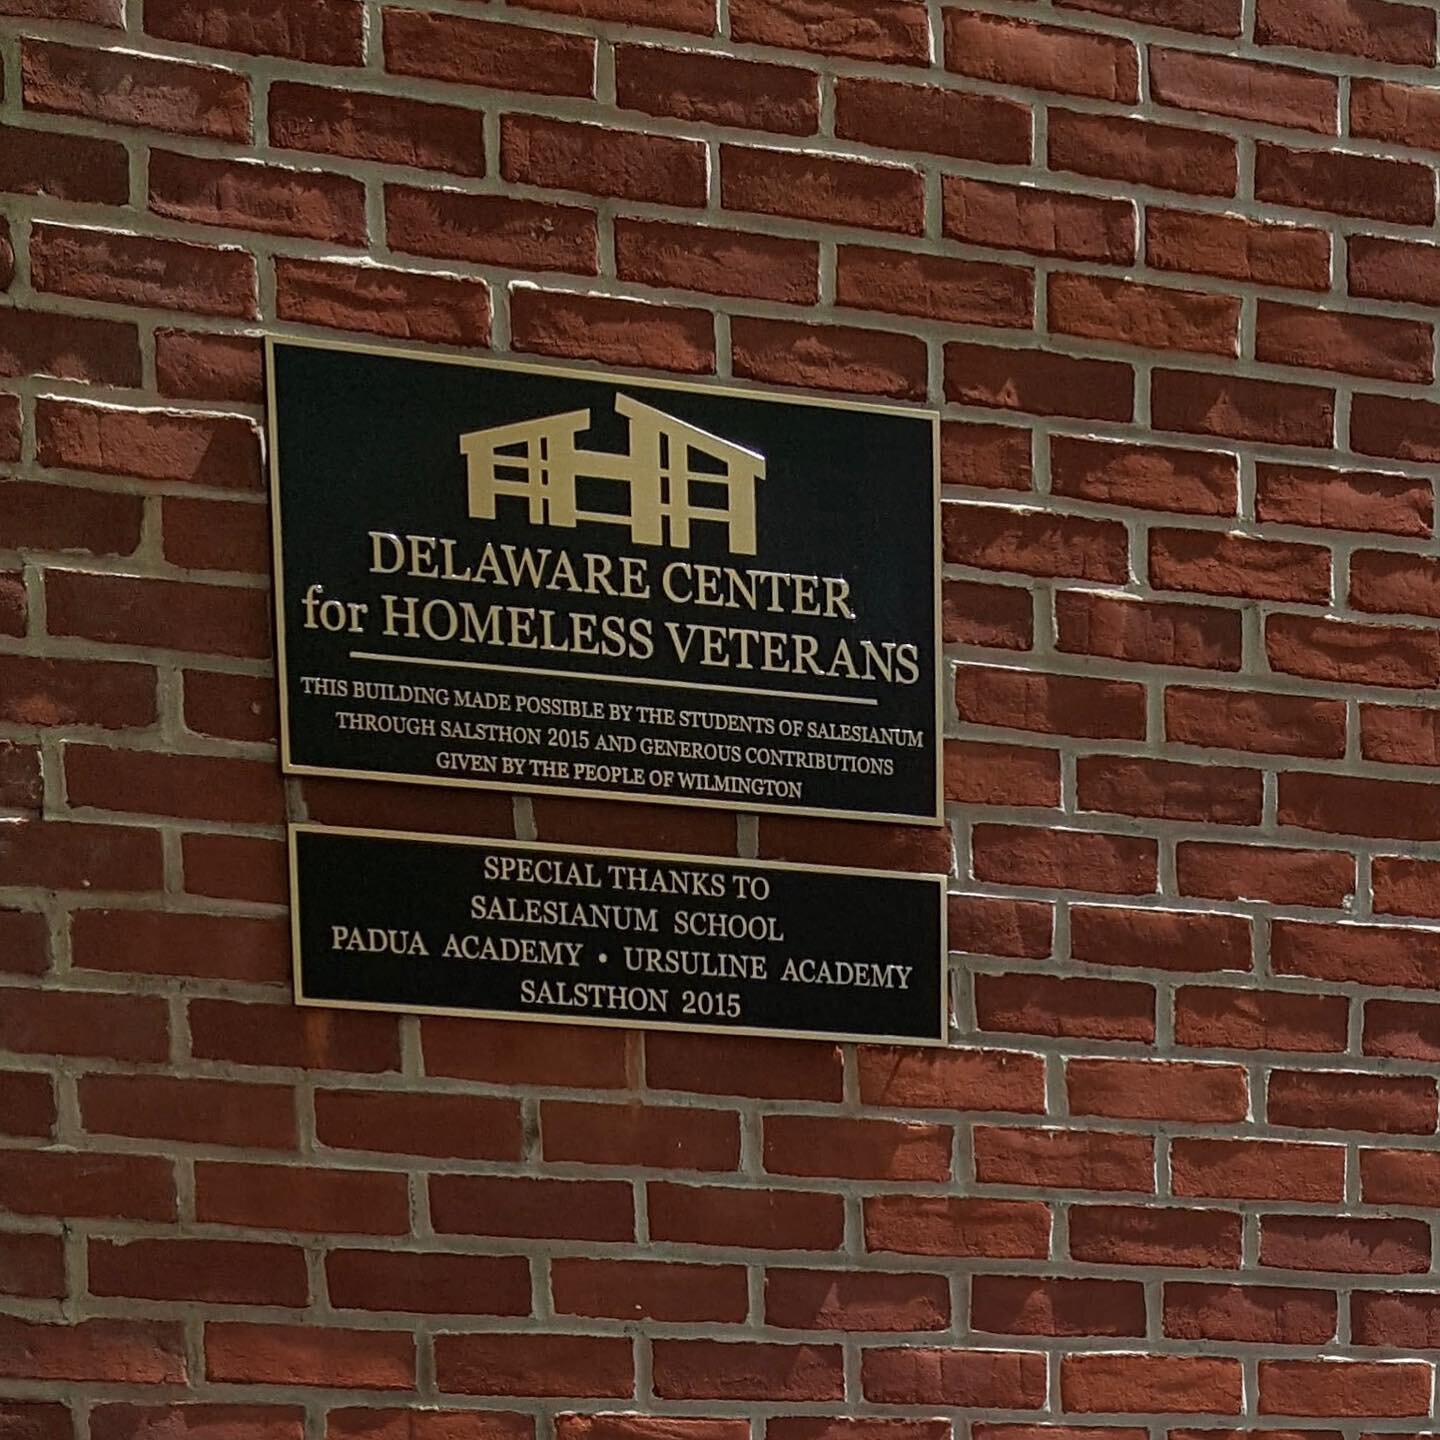 Founded in 2009 by US Veteran David Mosley, the Delaware Center for Homeless Veterans provides housing and supportive services to homeless Veterans in the state of Delaware.

By working with the local VA and other area and national non-profits, our g